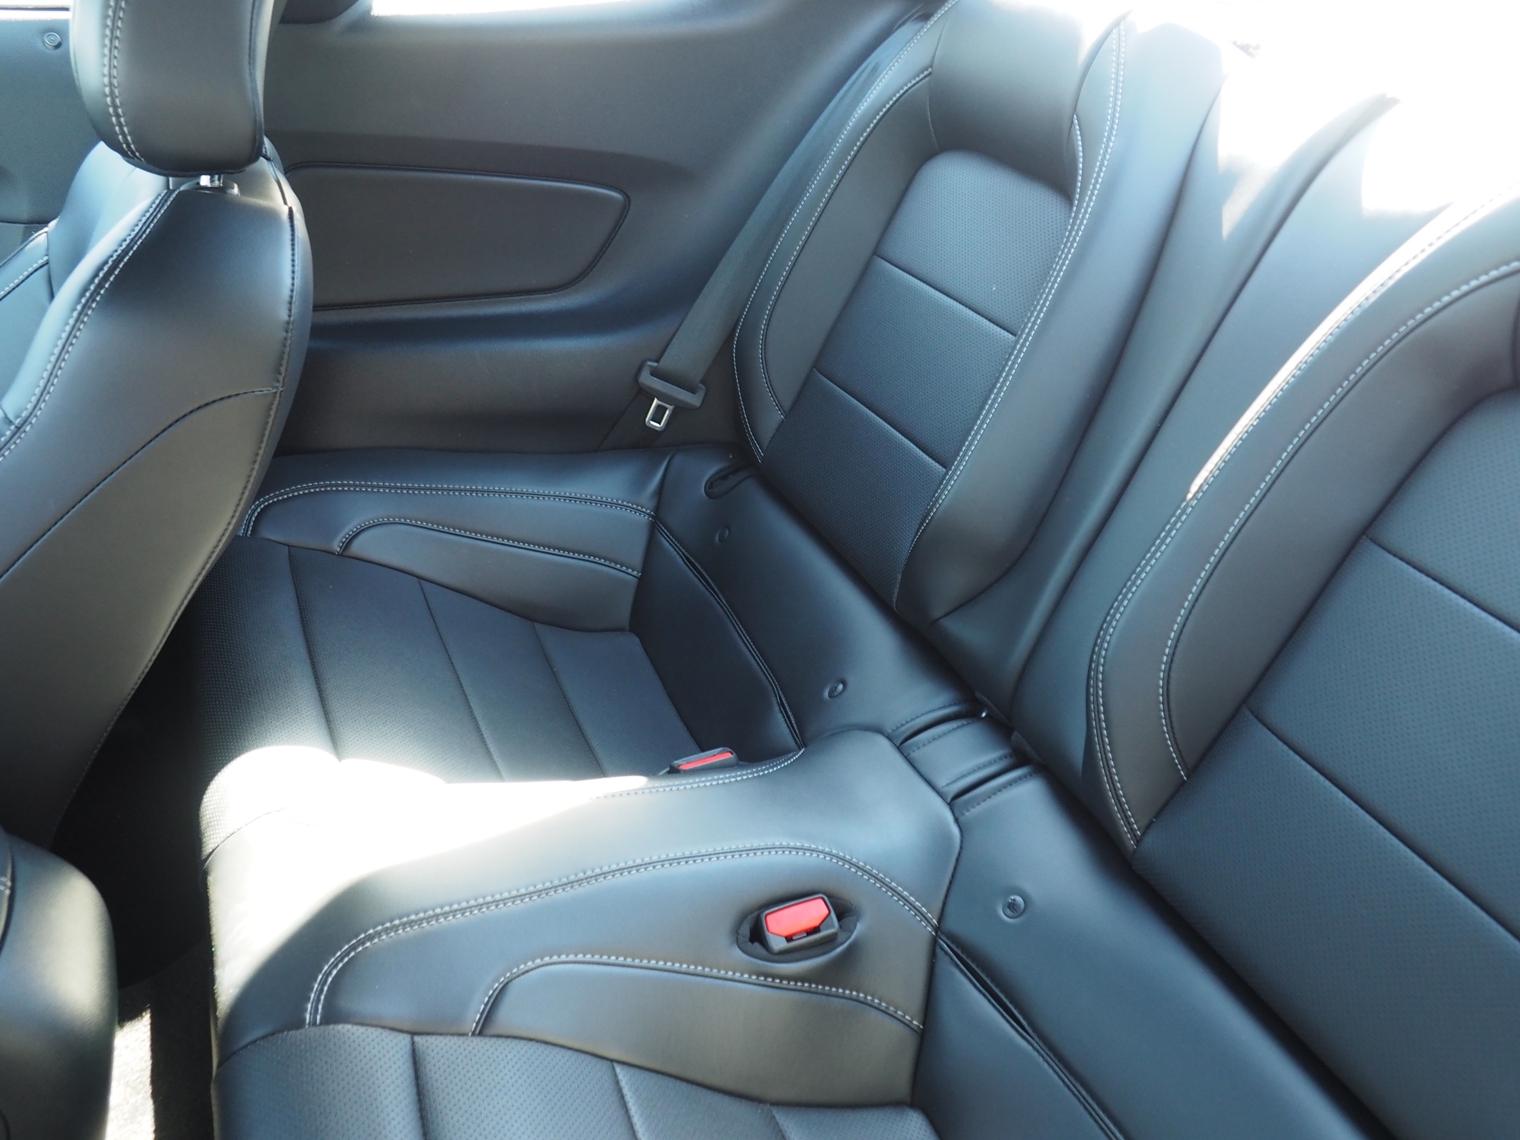 Rear seat of 2021 Mustang Mach 1